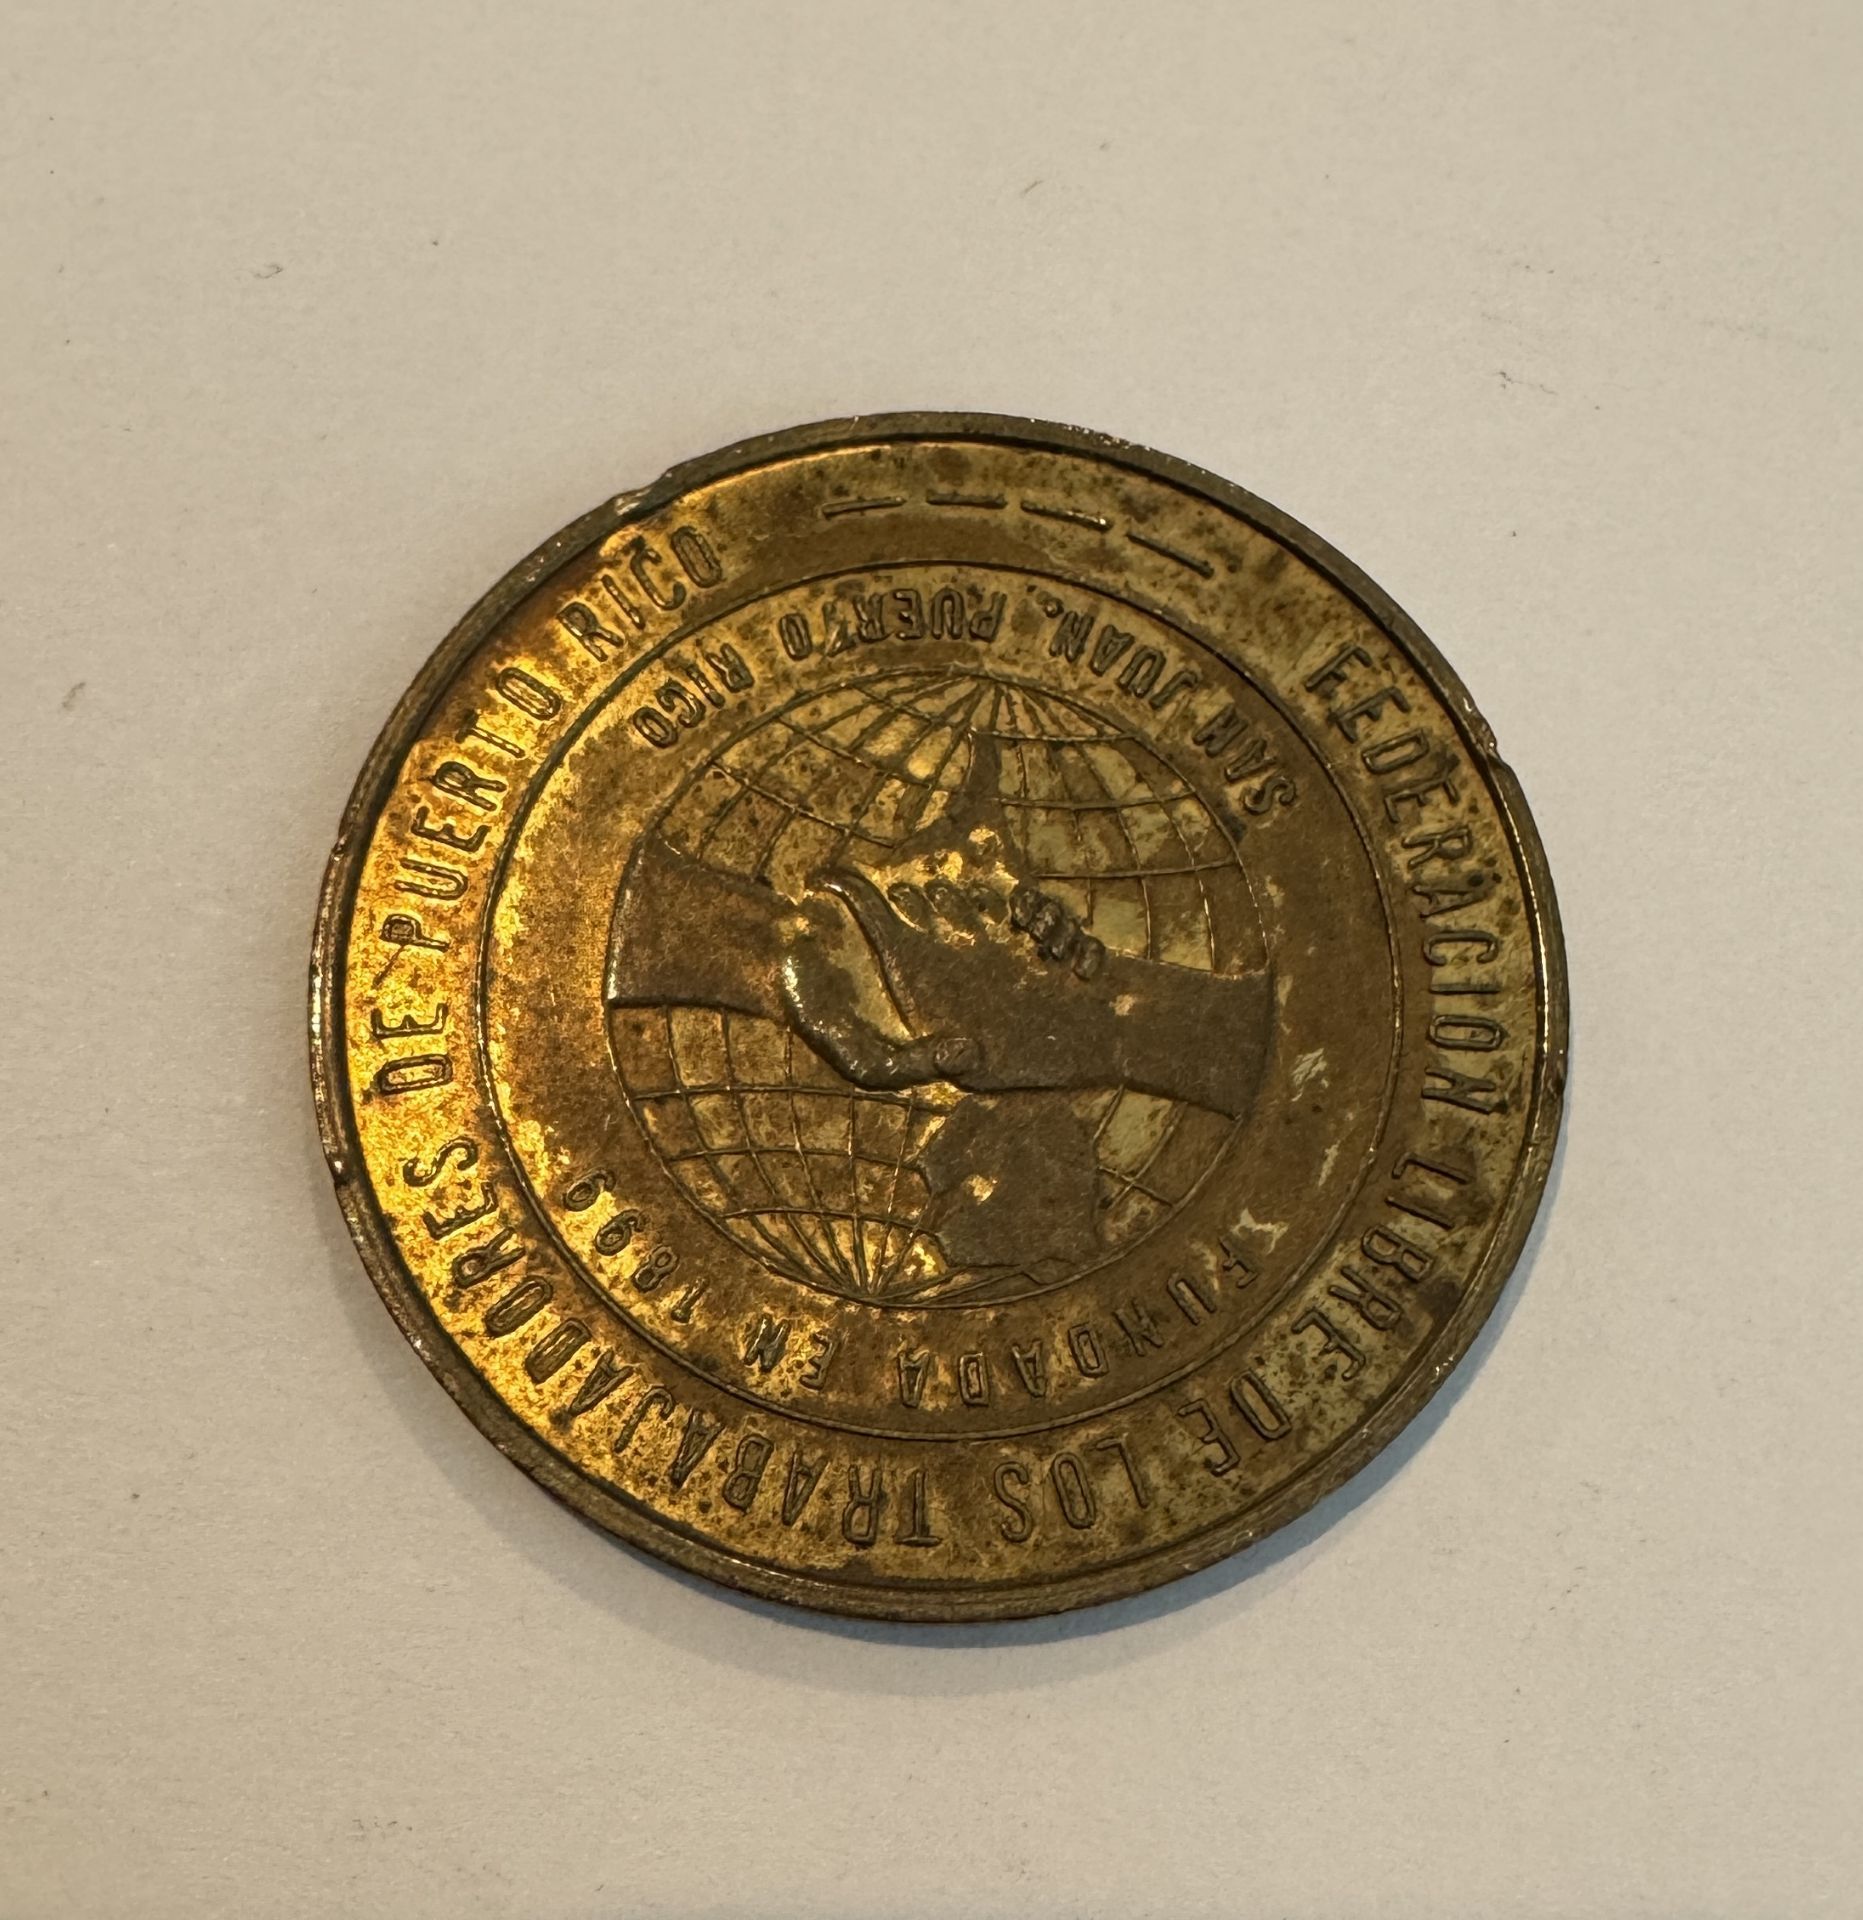 100 YEAR COMMEMORATIVE MEDAL COIN - Image 2 of 2